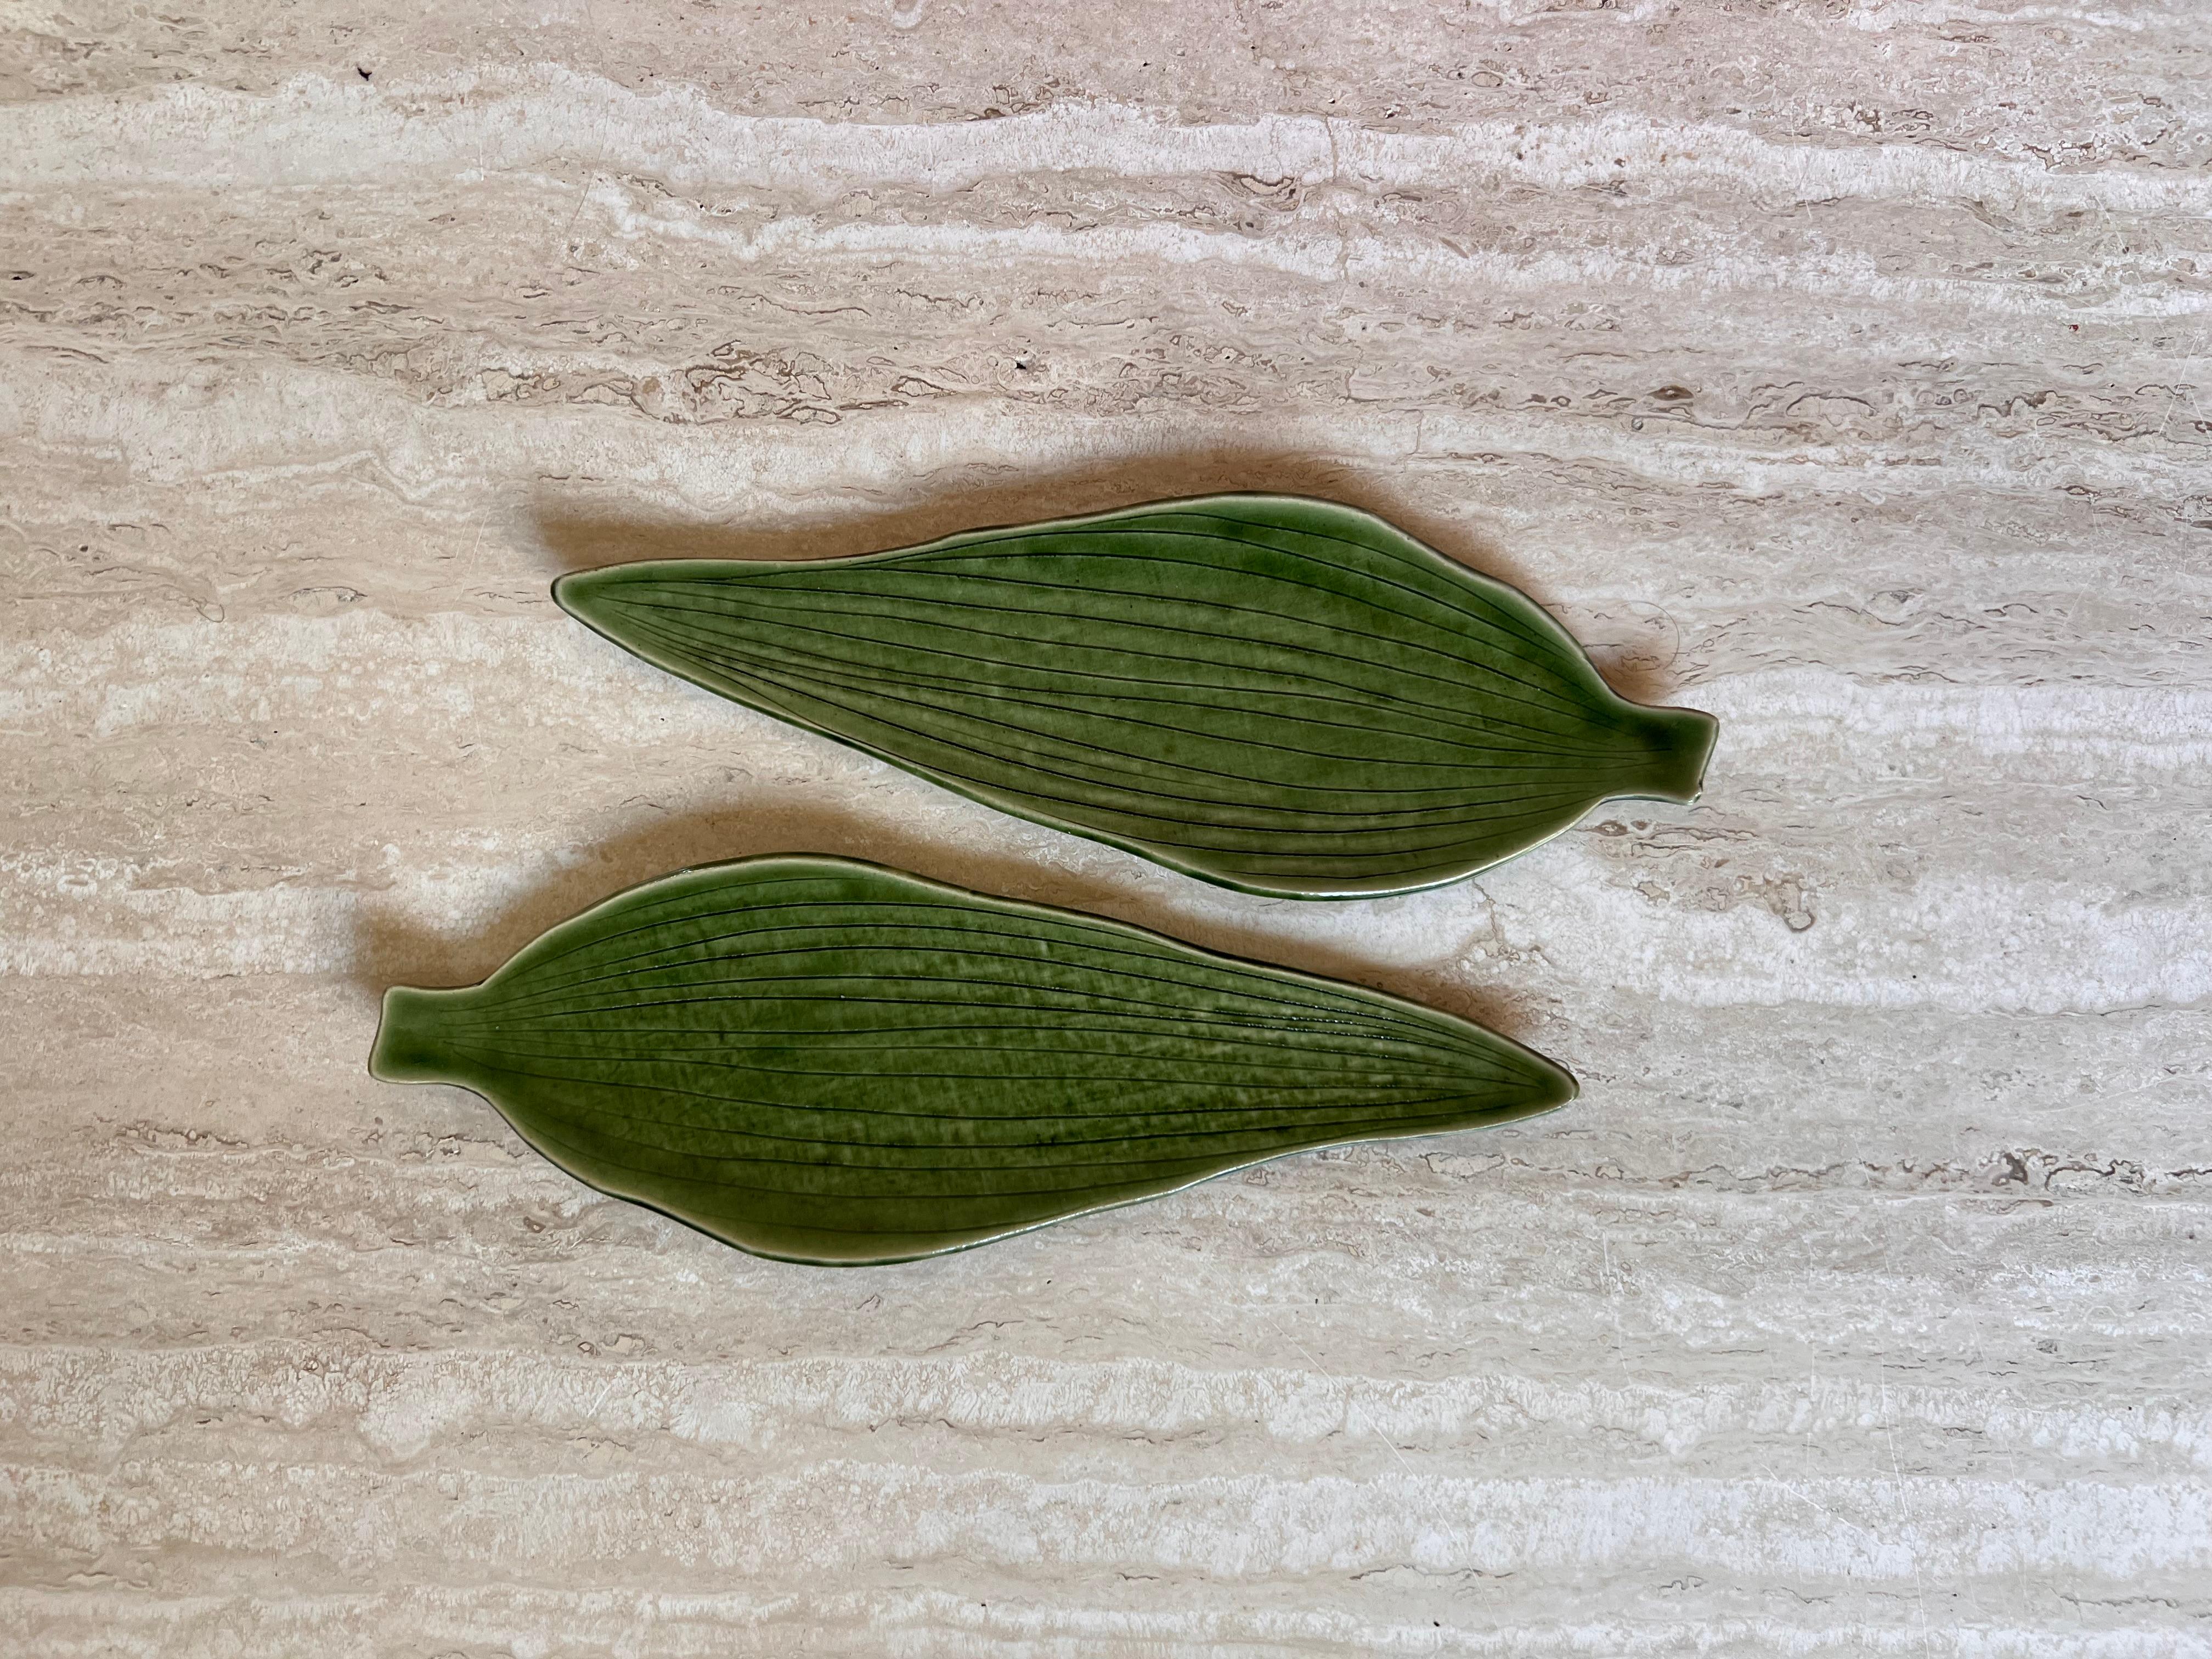 A pair of vintage Asian ceramic and glazed dishes depicting broad leaves, 1970s. From Japan, mid 20th century. A serene grass green hue with the leaf veins etched in. Fabulous condition. 
10.5” W x 3.75” D x .25” H.